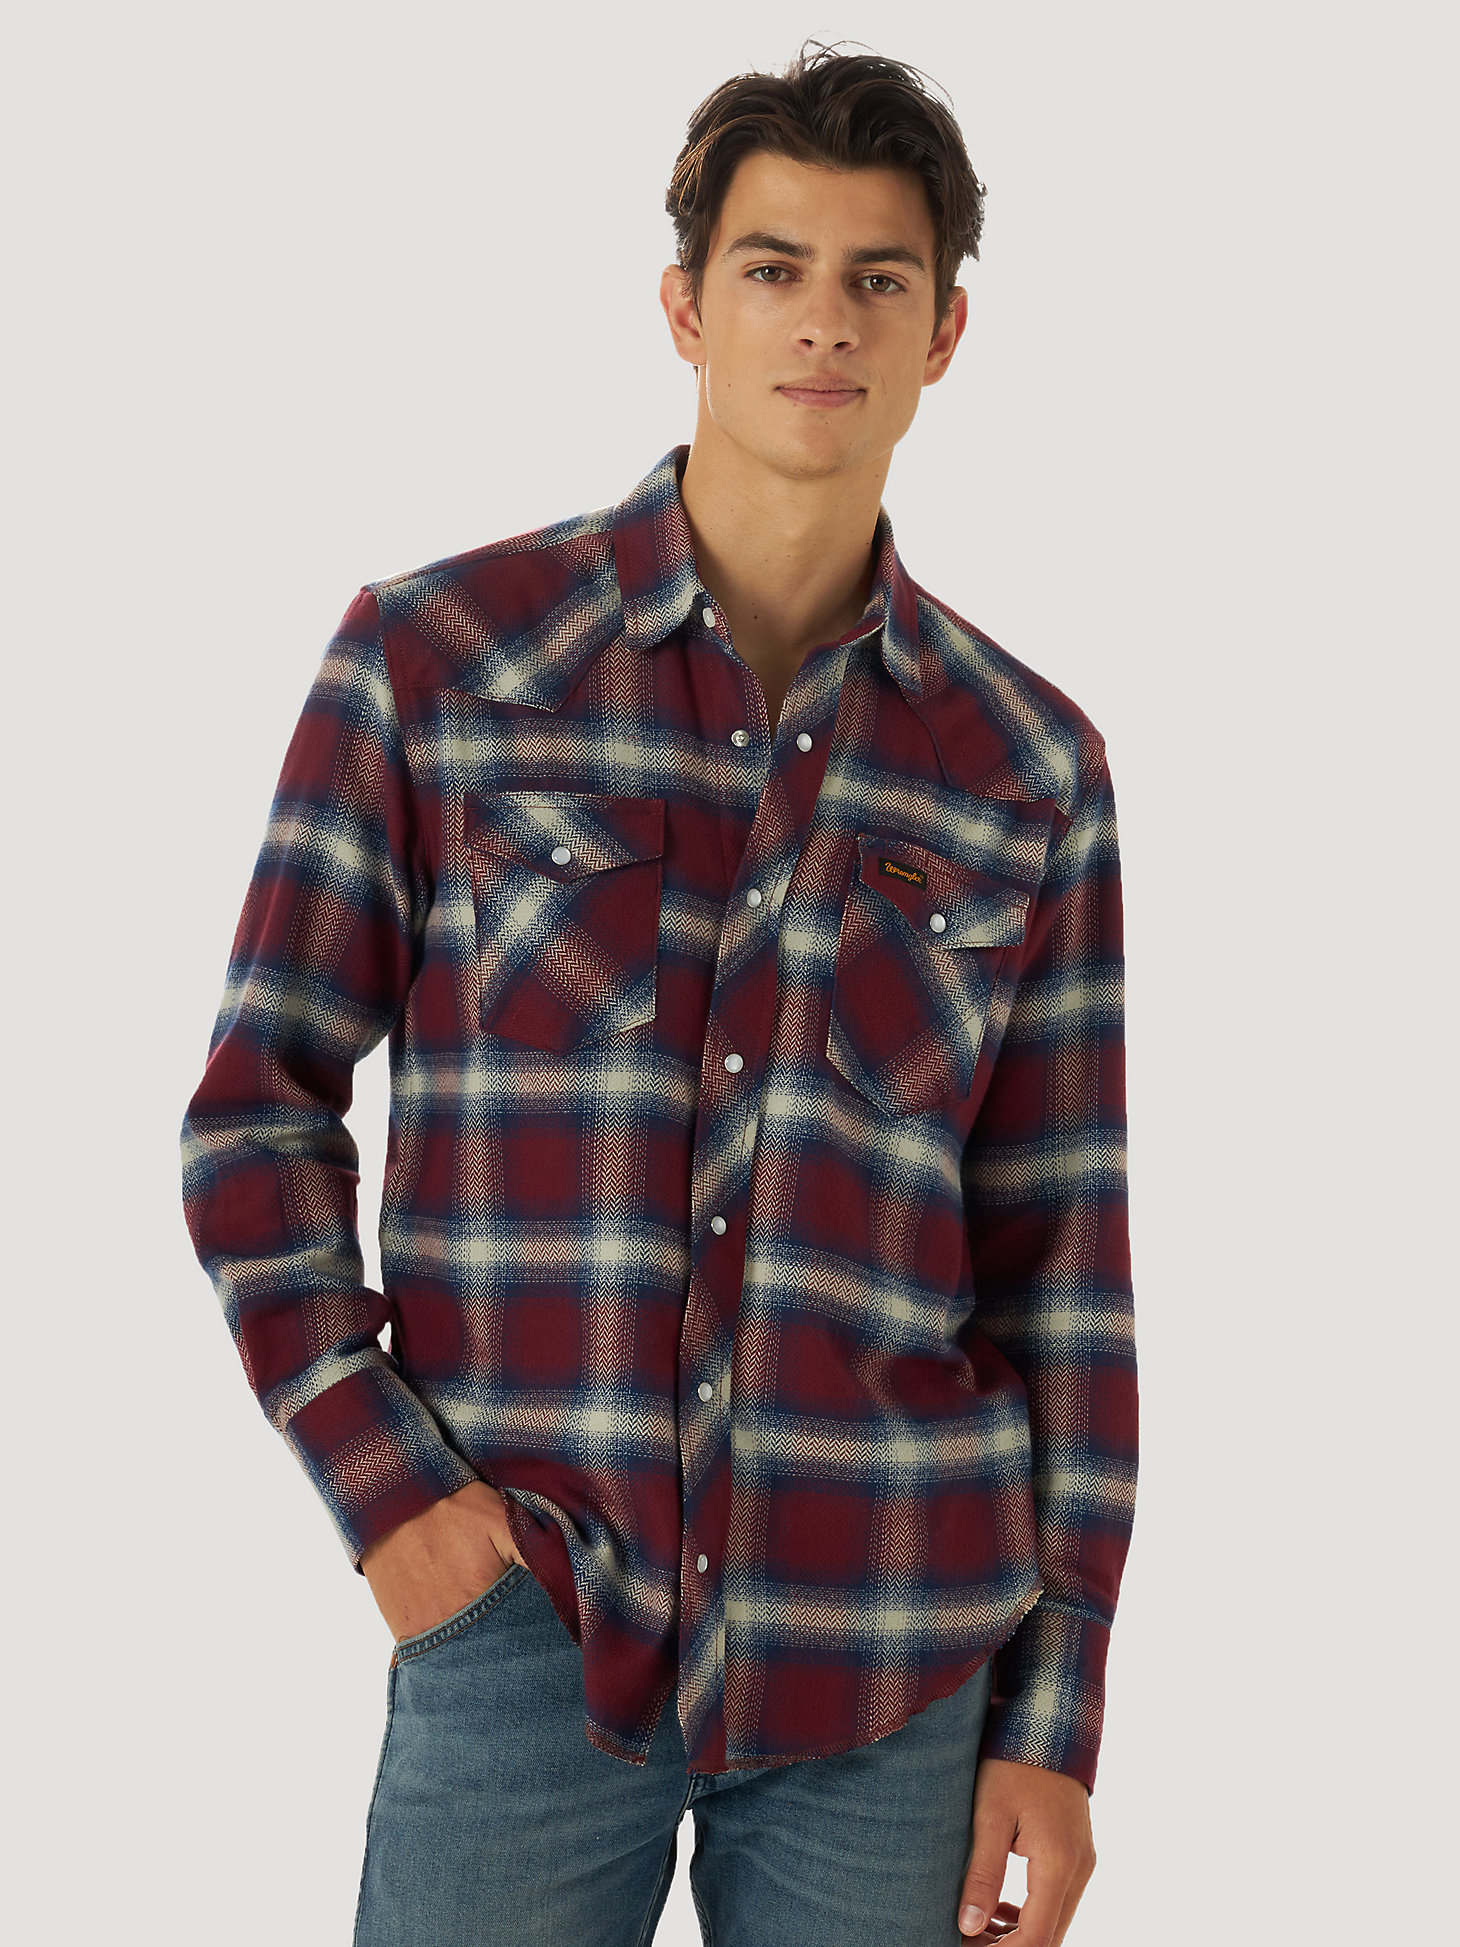 Men's Wrangler® Heritage Plaid Snap Front Shirt in Tawny Port main view